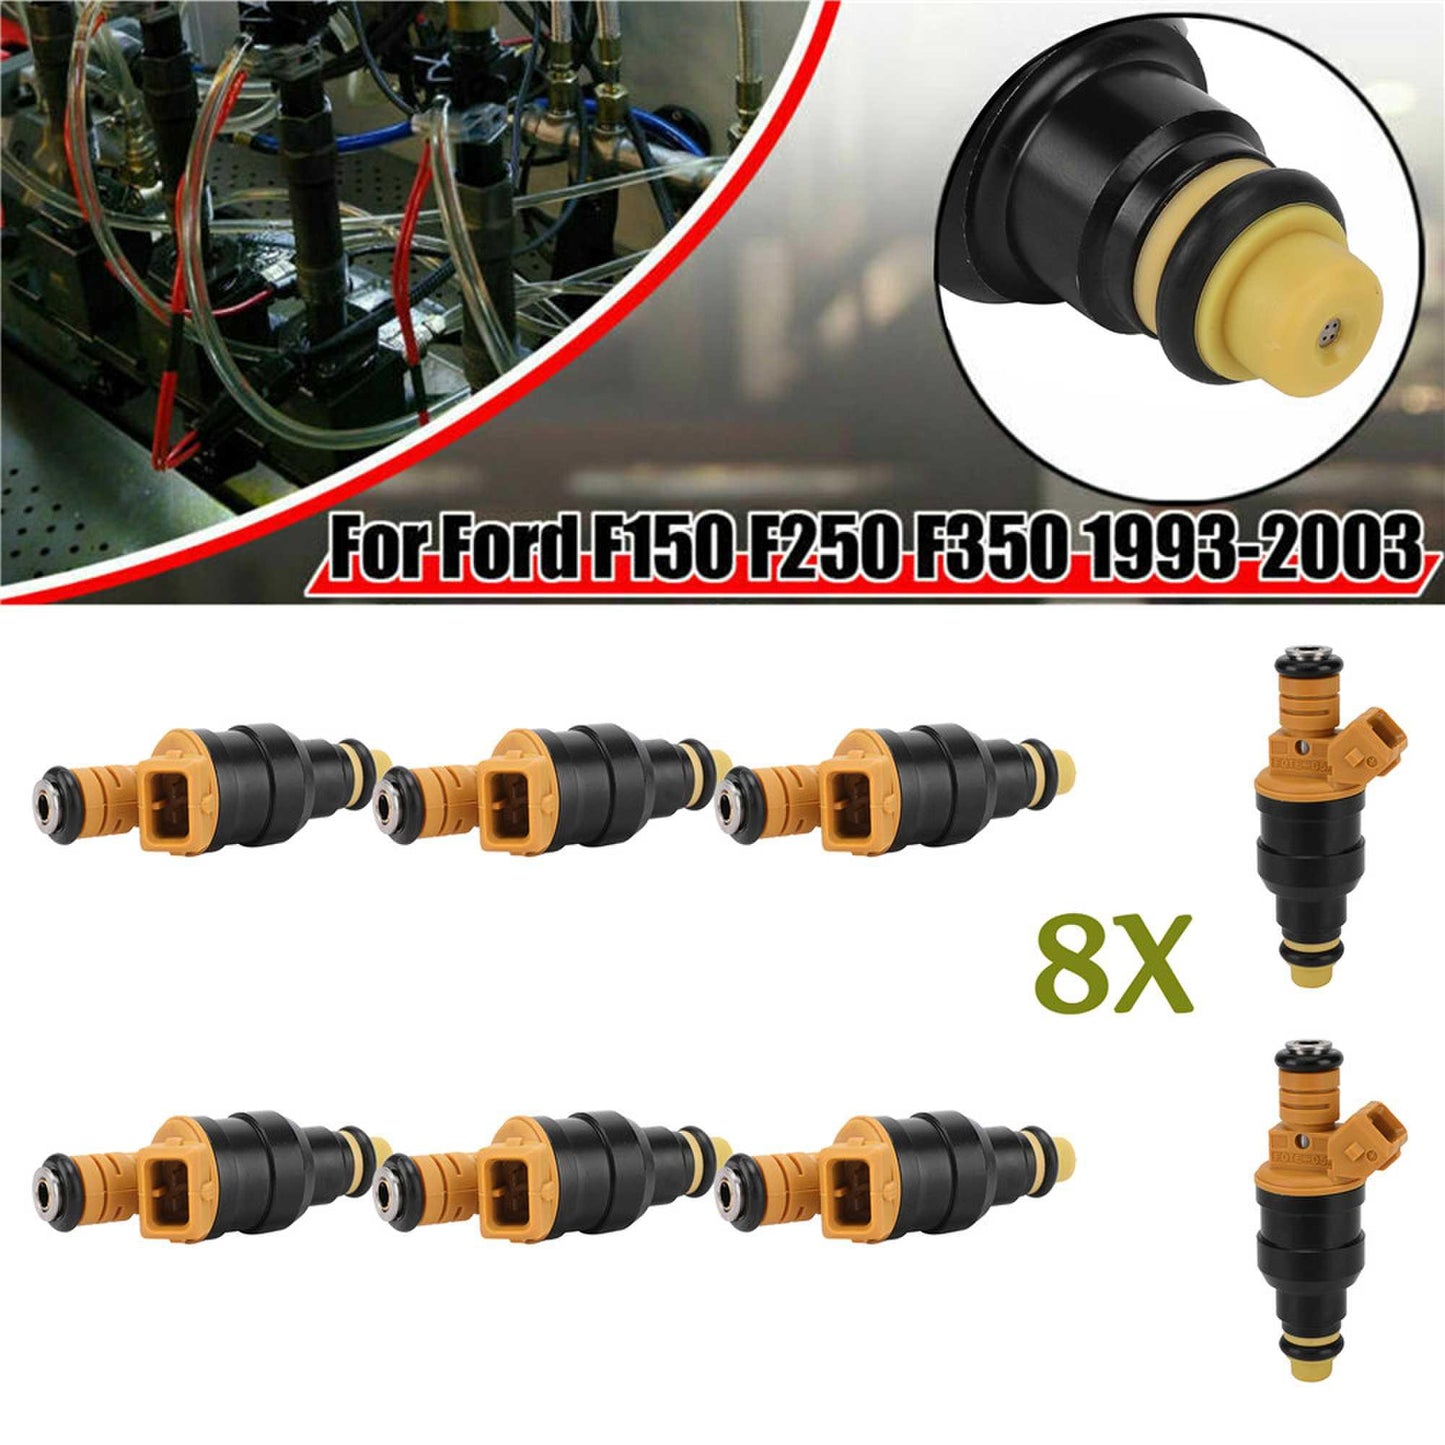 RASTP 8 Pcs Fuel Injector Fit for Ford Mustang Excursion Expedition Crown Victoria 4.6L 5.0L 5.4L 5.8L - RASTP